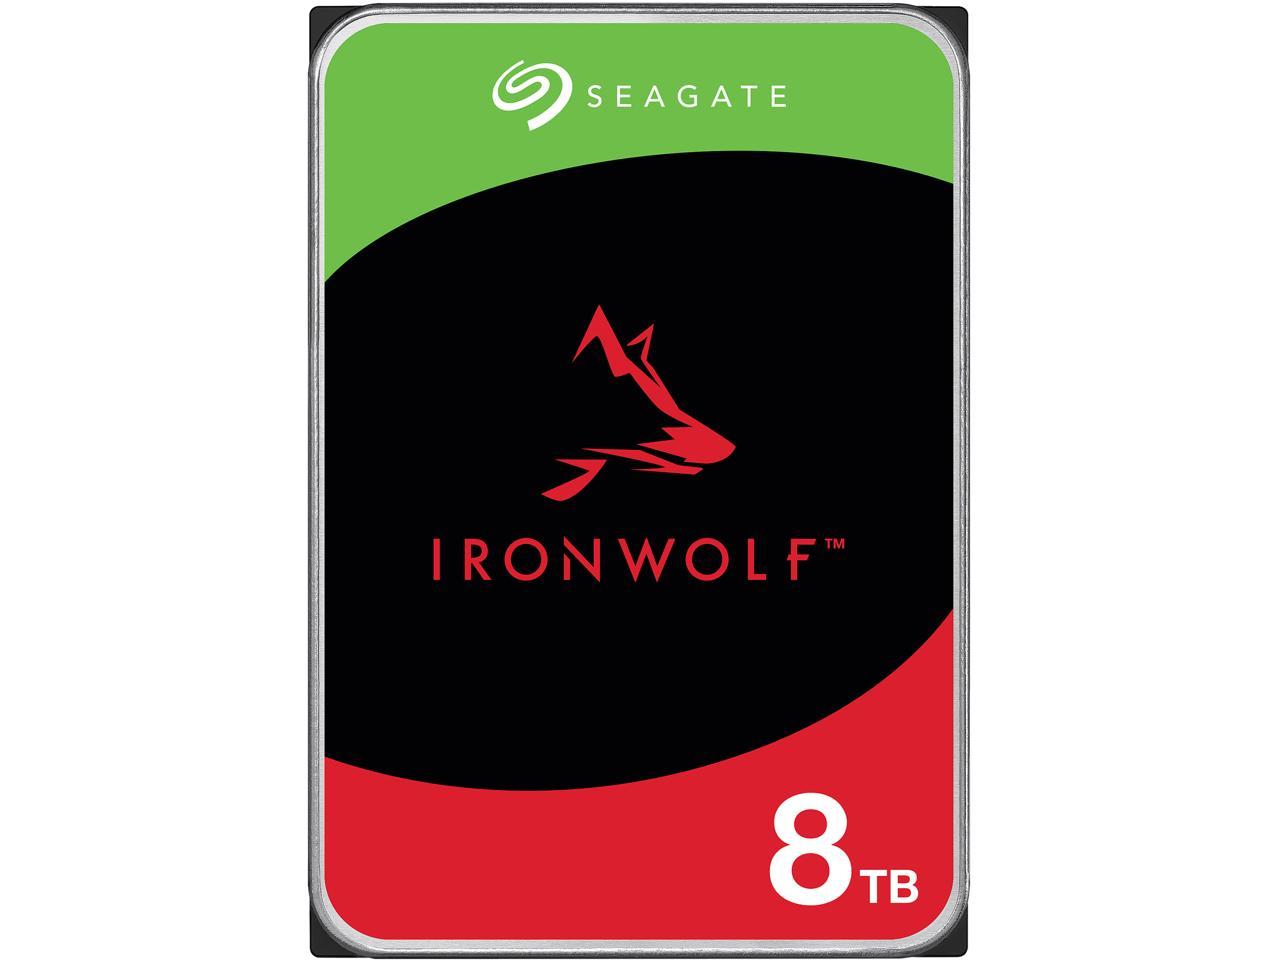 32TB Asustor NAS Bundle with Four 8TB Seagate Iron Wolf HDDs AS6604T Asustor Lockerstor 4 